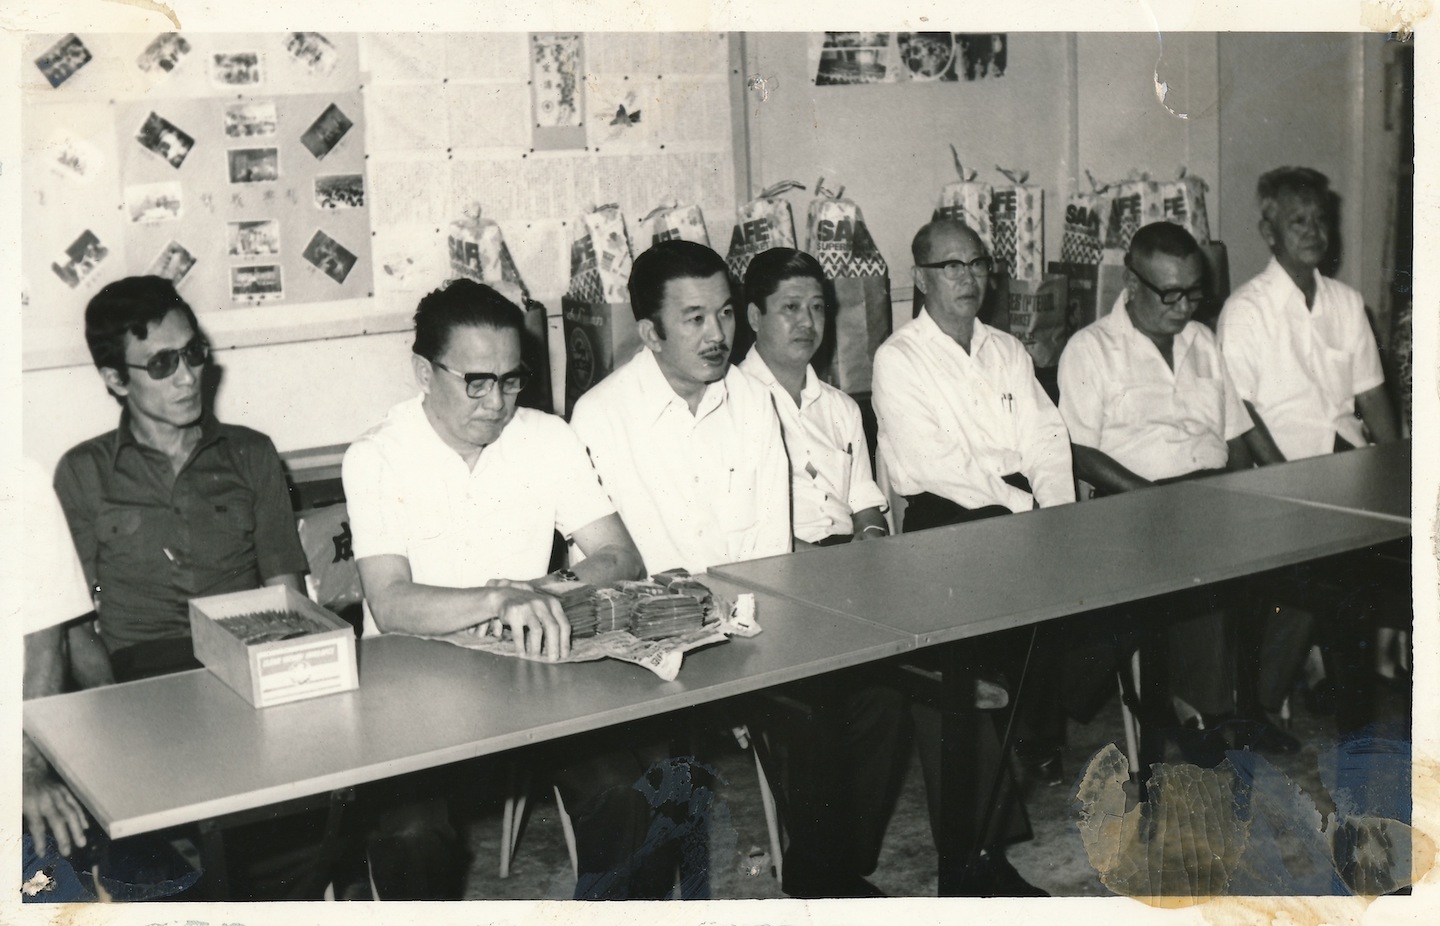 Mr Ang Yew Seng championed innovative approaches in funeral services and led his team to remarkable heights